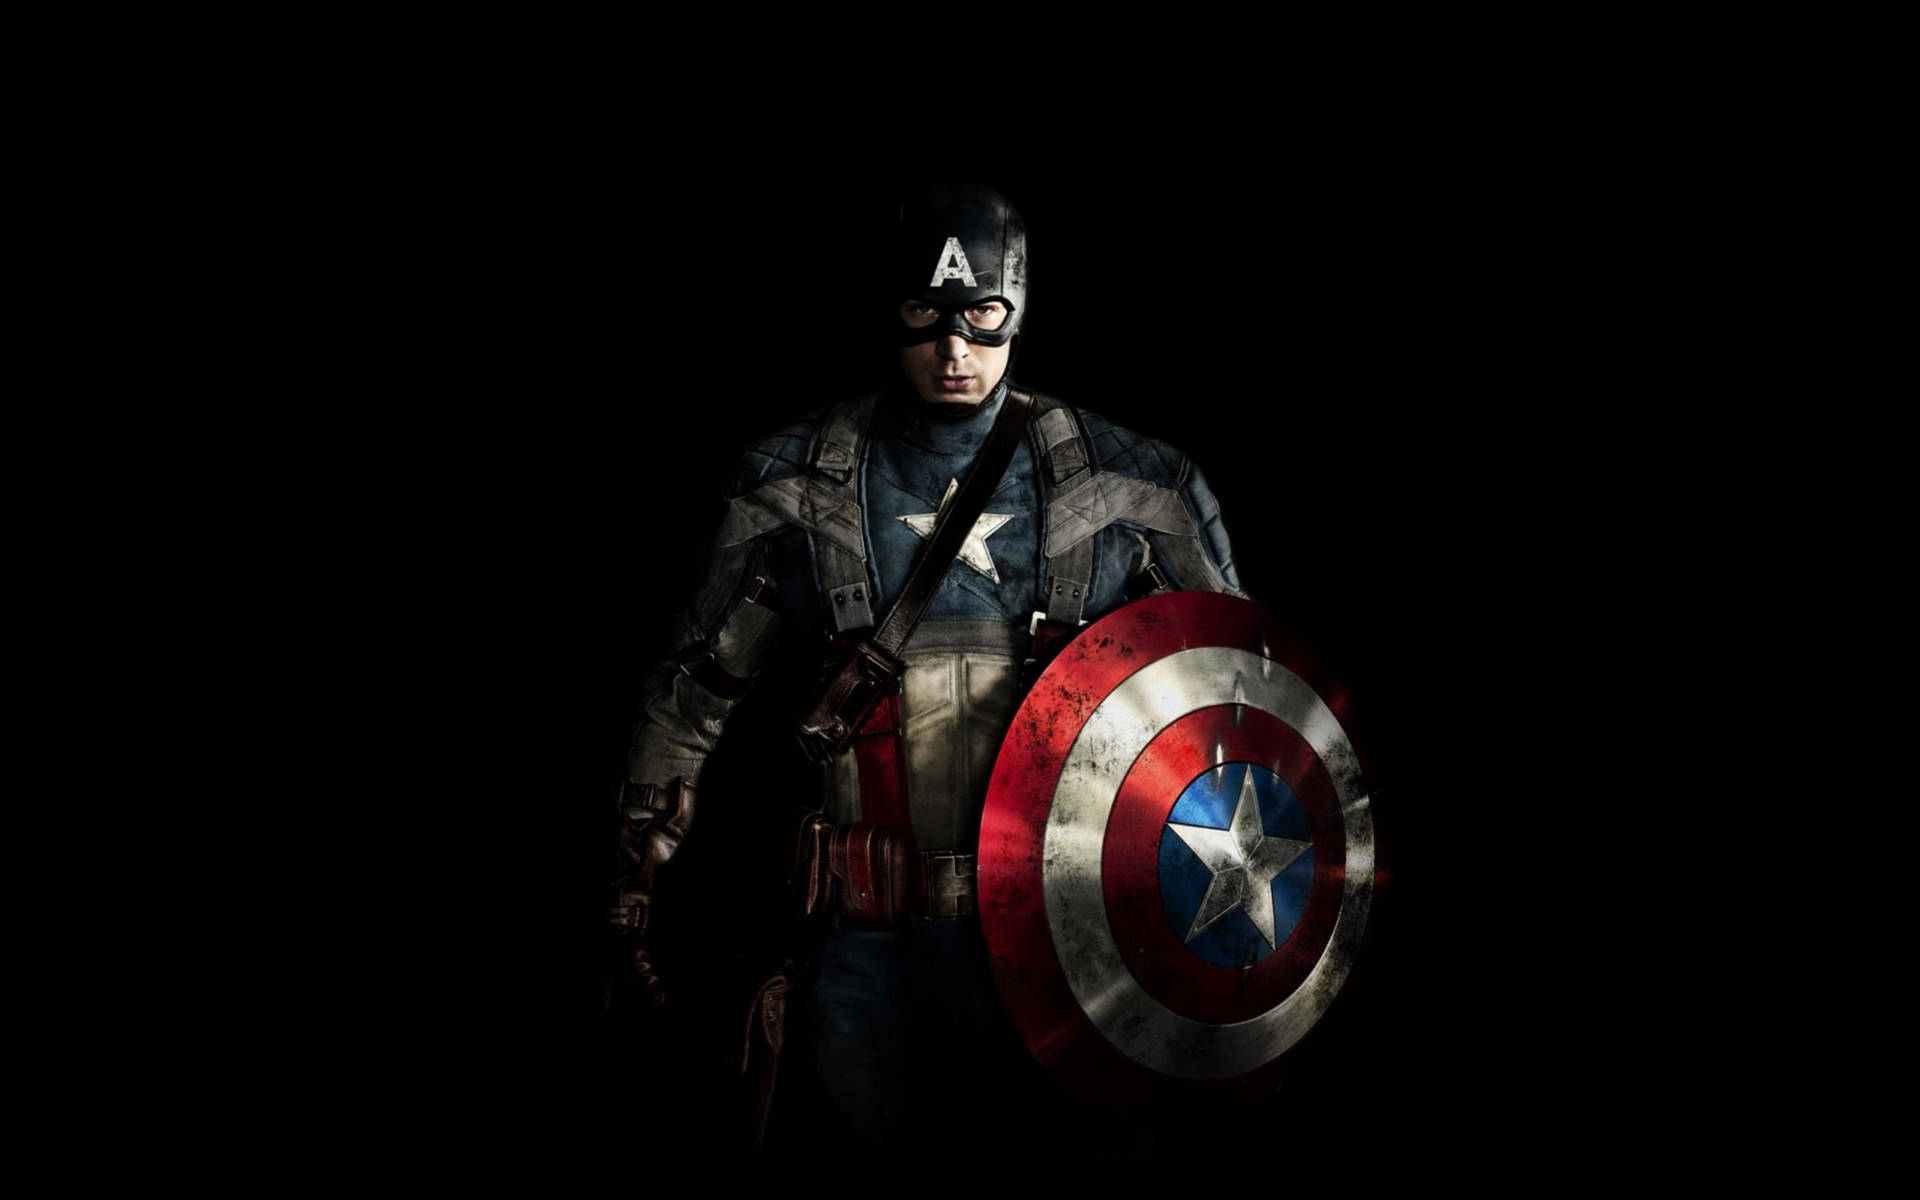 Captain America stands tall and proud in the dark night. Wallpaper